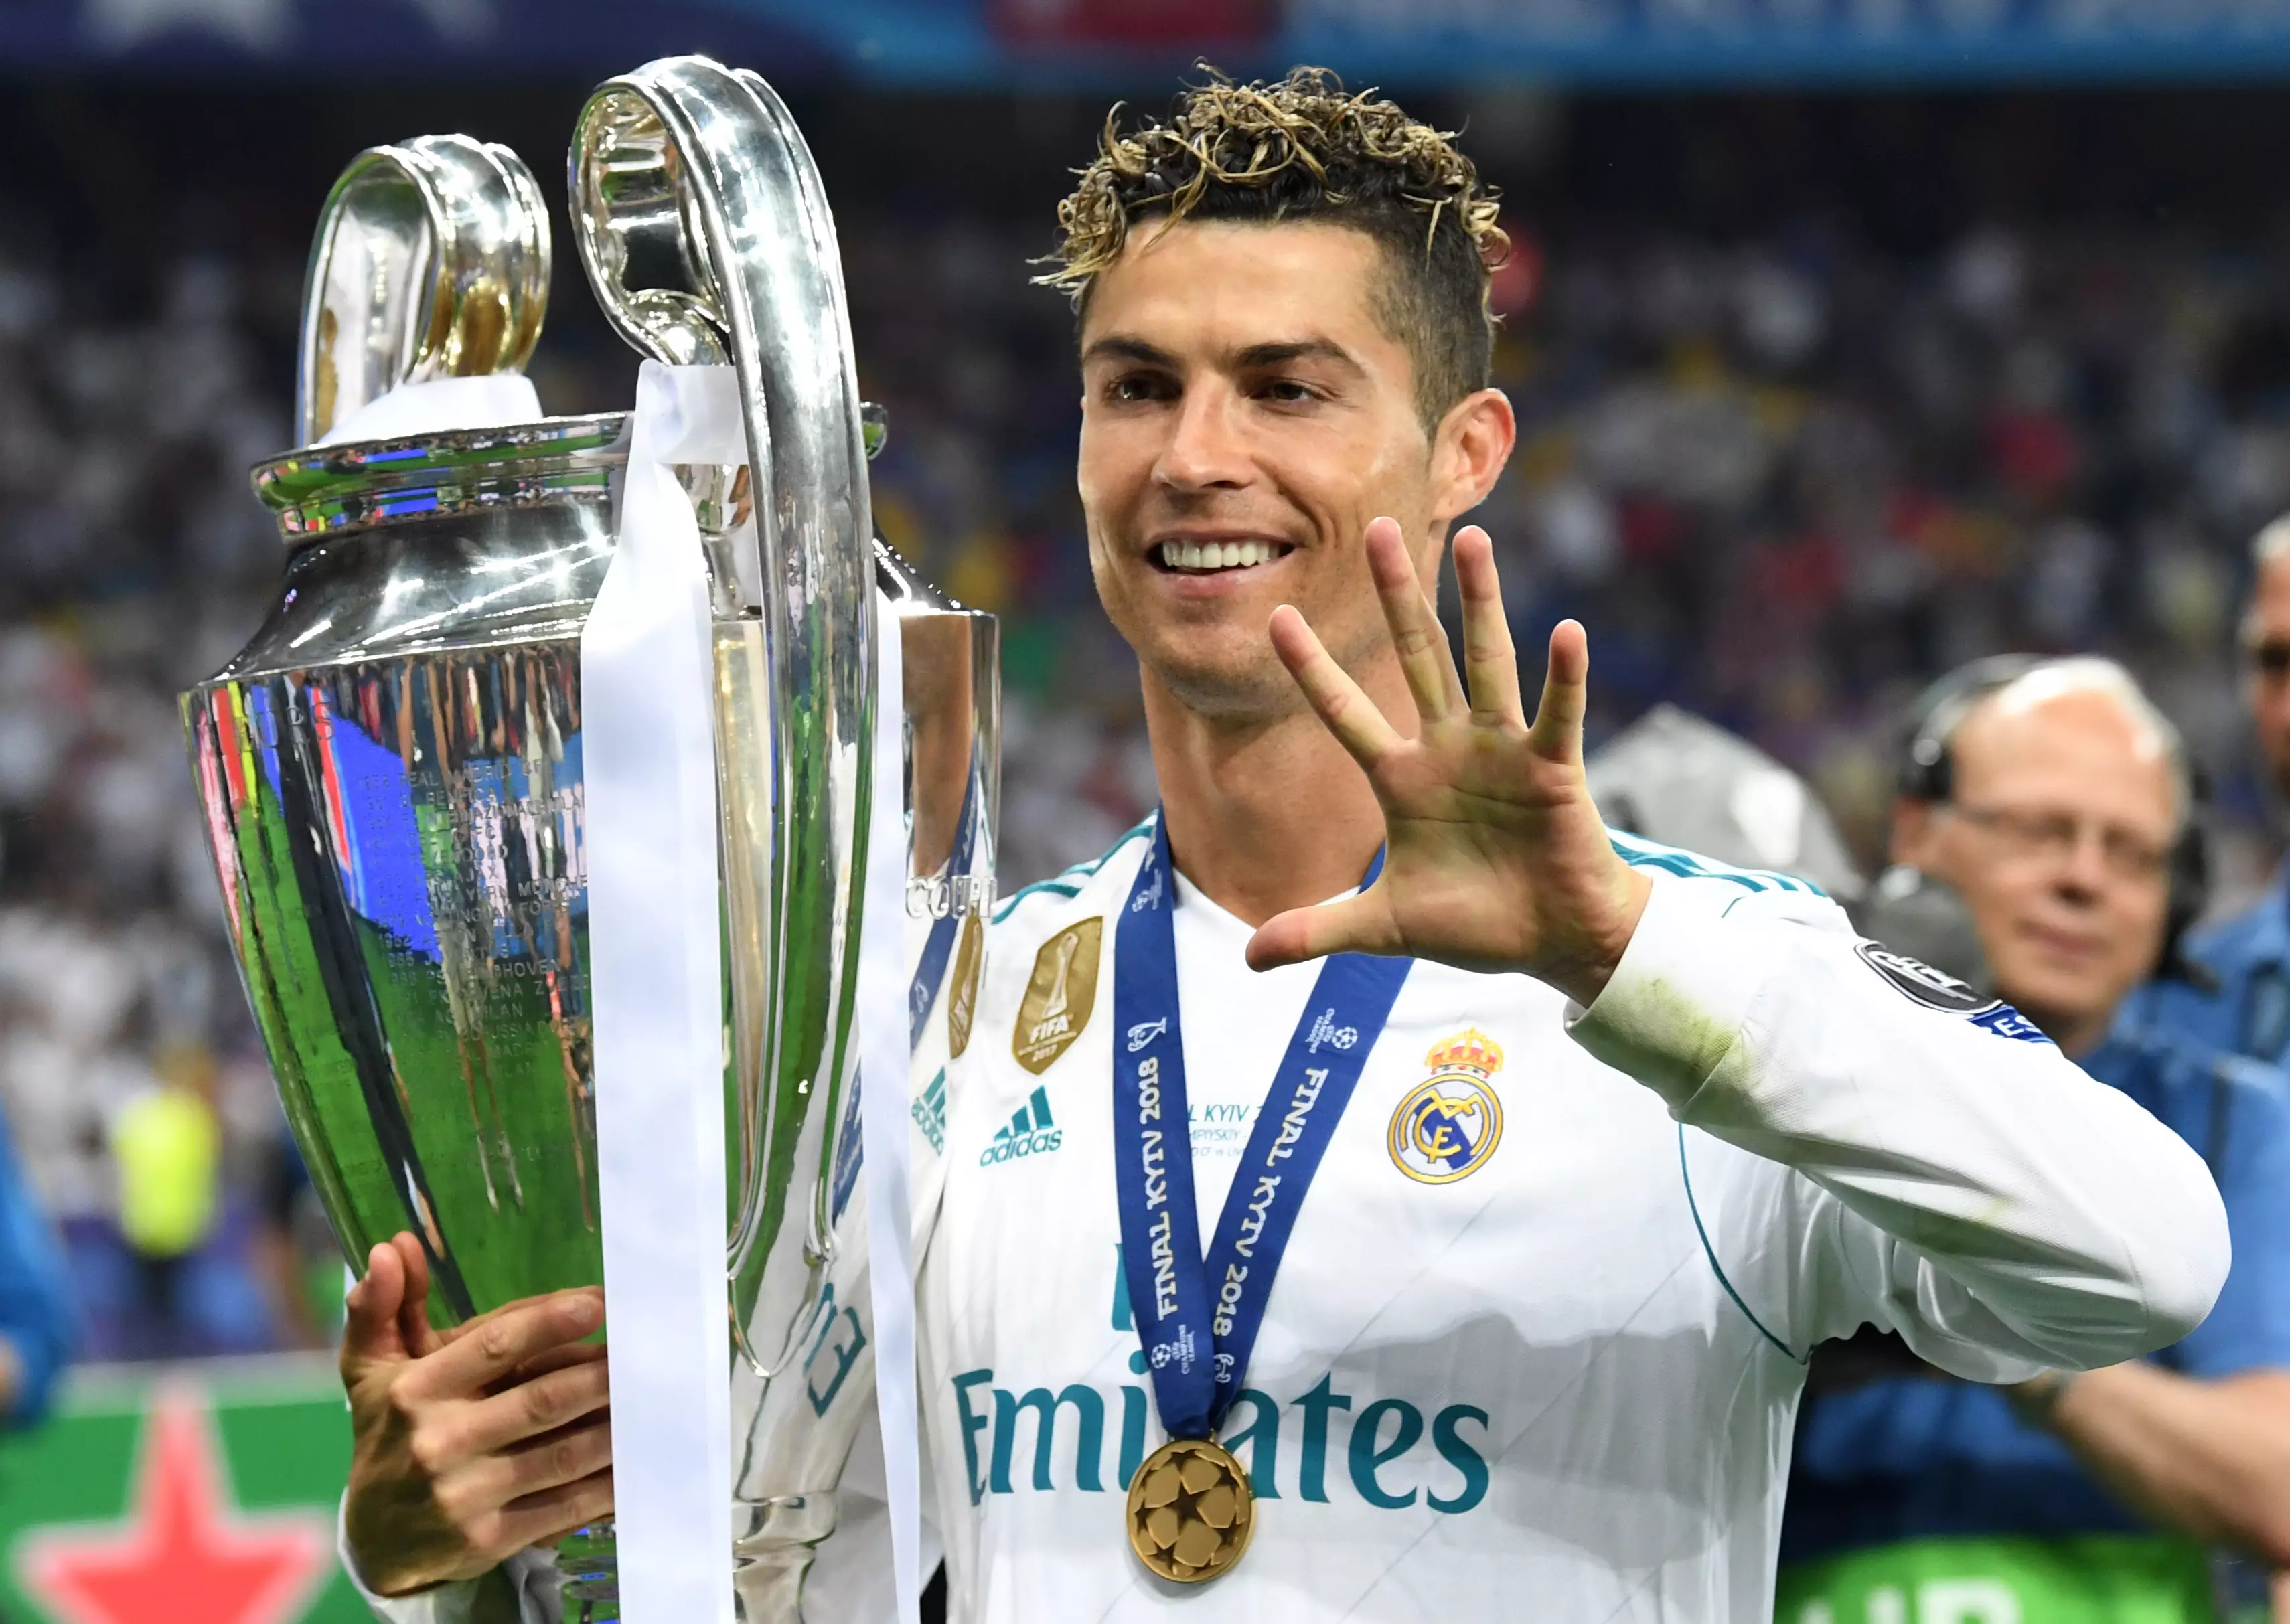 Ronaldo poses with the Champions League trophy. Image: PA